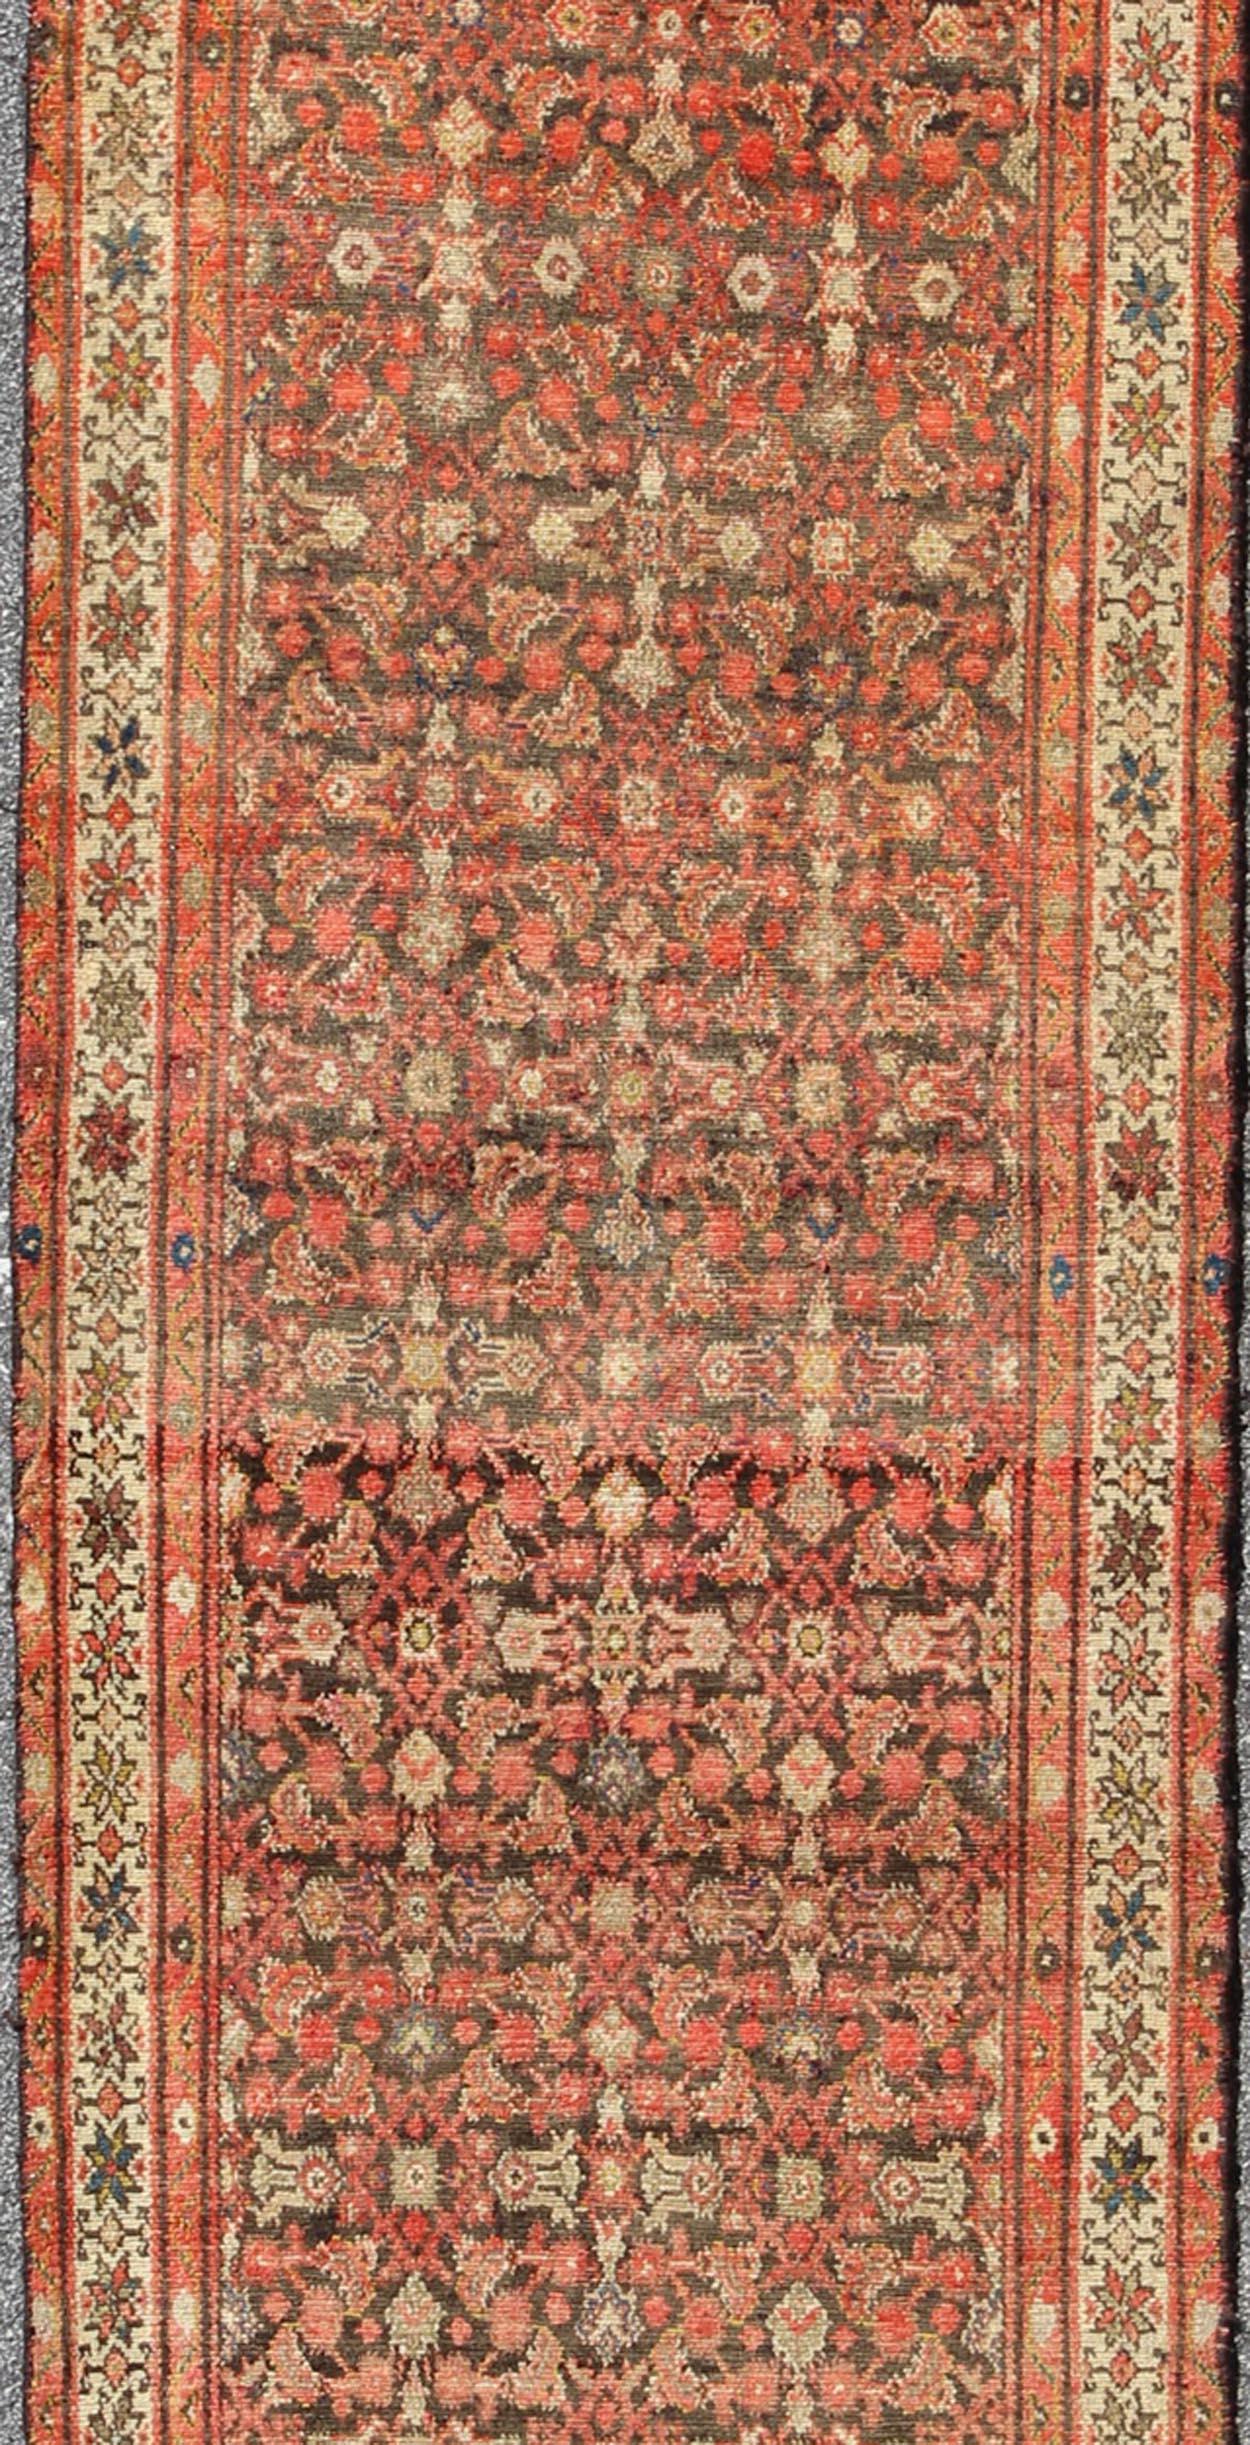 Malayer antique Persian runner H-711-21, kwarugs. This antique Malayer runner (circa 1900) bears a beautiful, all-over sub geometric design paired with a delightful palette of various shades of brown, charcoal, light green, ivory and orange. The